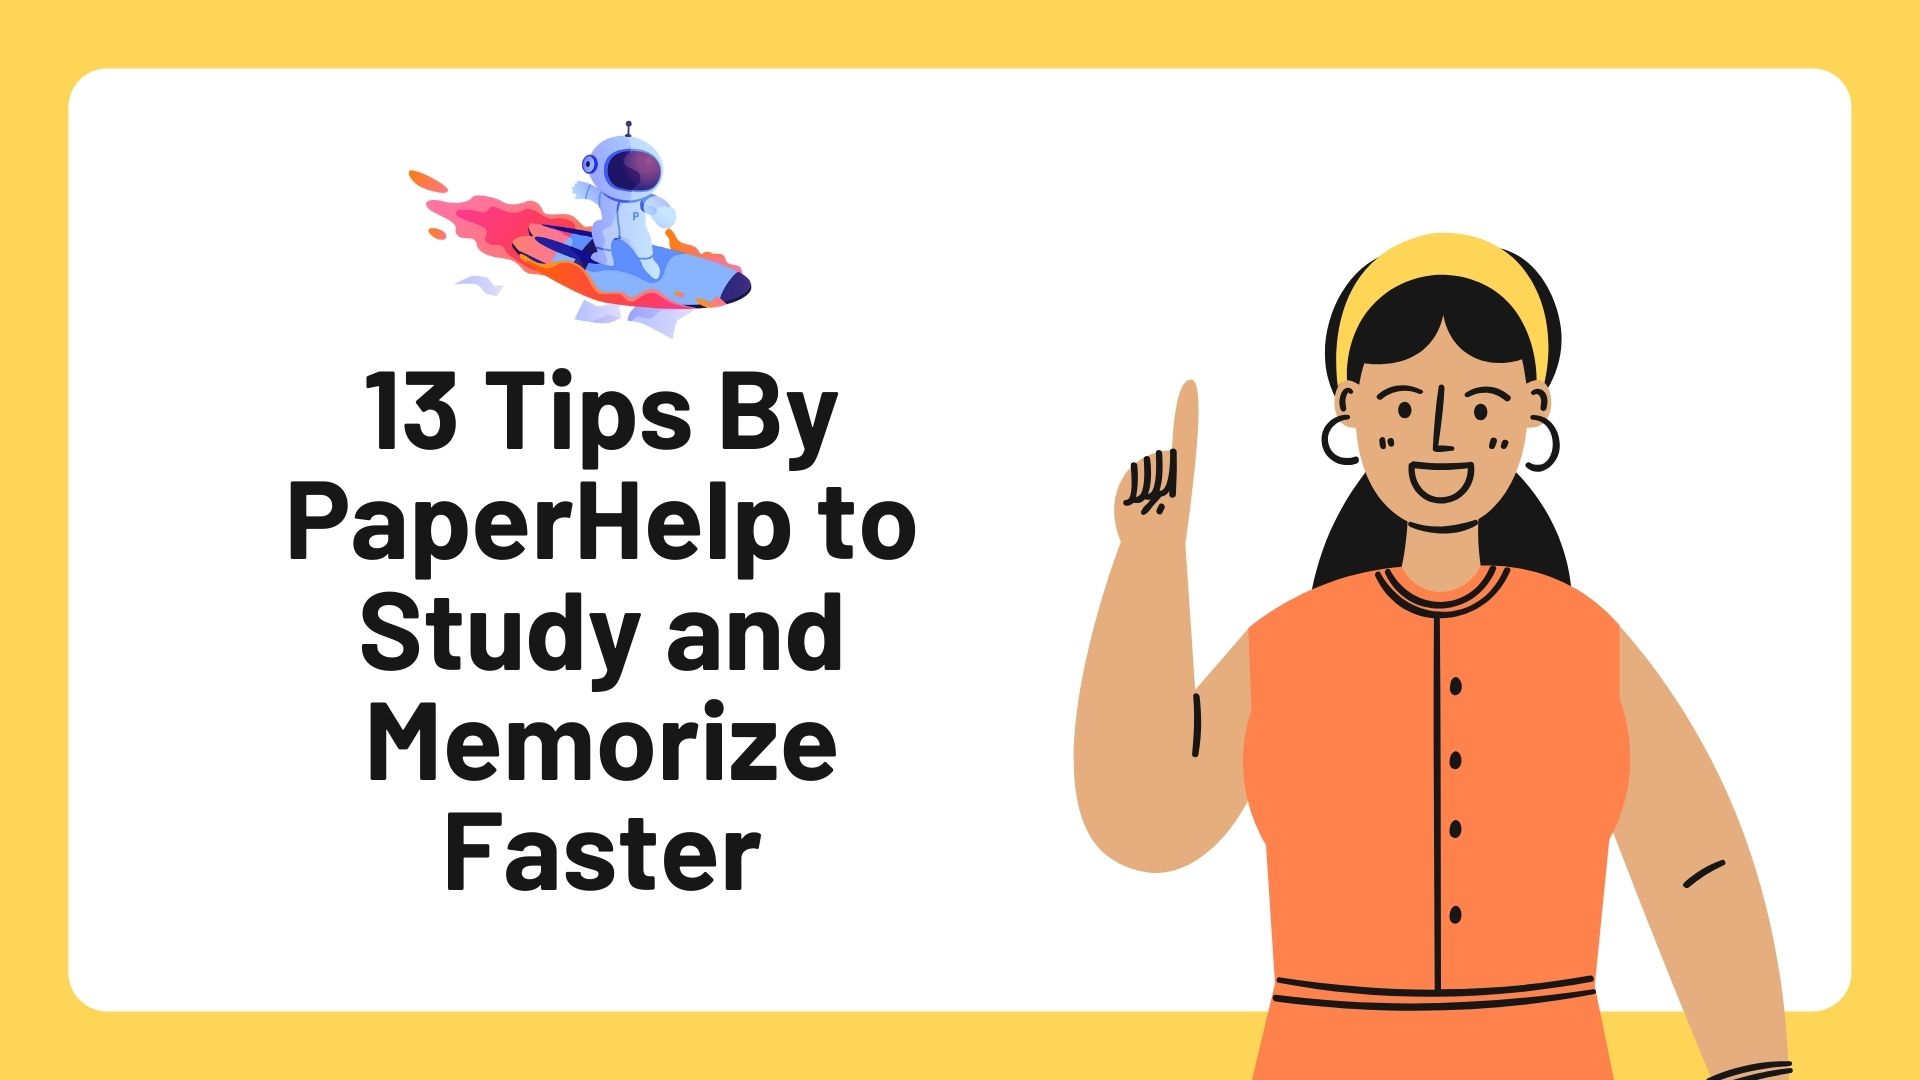 public/uploads/2021/09/13-Tips-By-PaperHelp-to-Study-and-Memorize-Faster.jpg